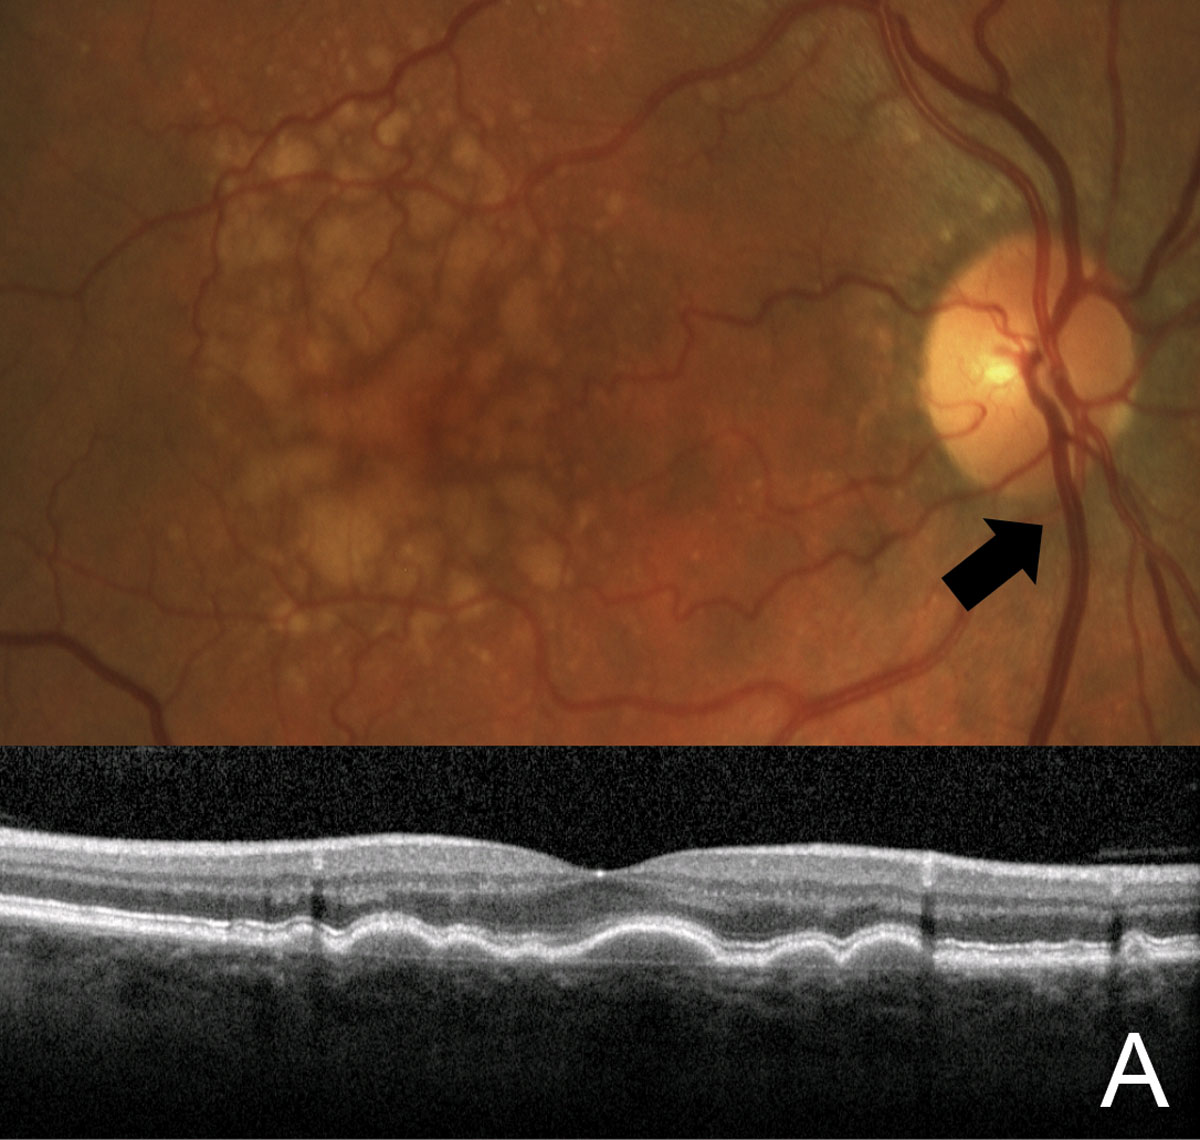 Monitoring dry AMD patients for risk factors for conversion to the wet form (such as the large, soft drusen shown here) is an ideal role for optometric skills in the continuum of retina care.